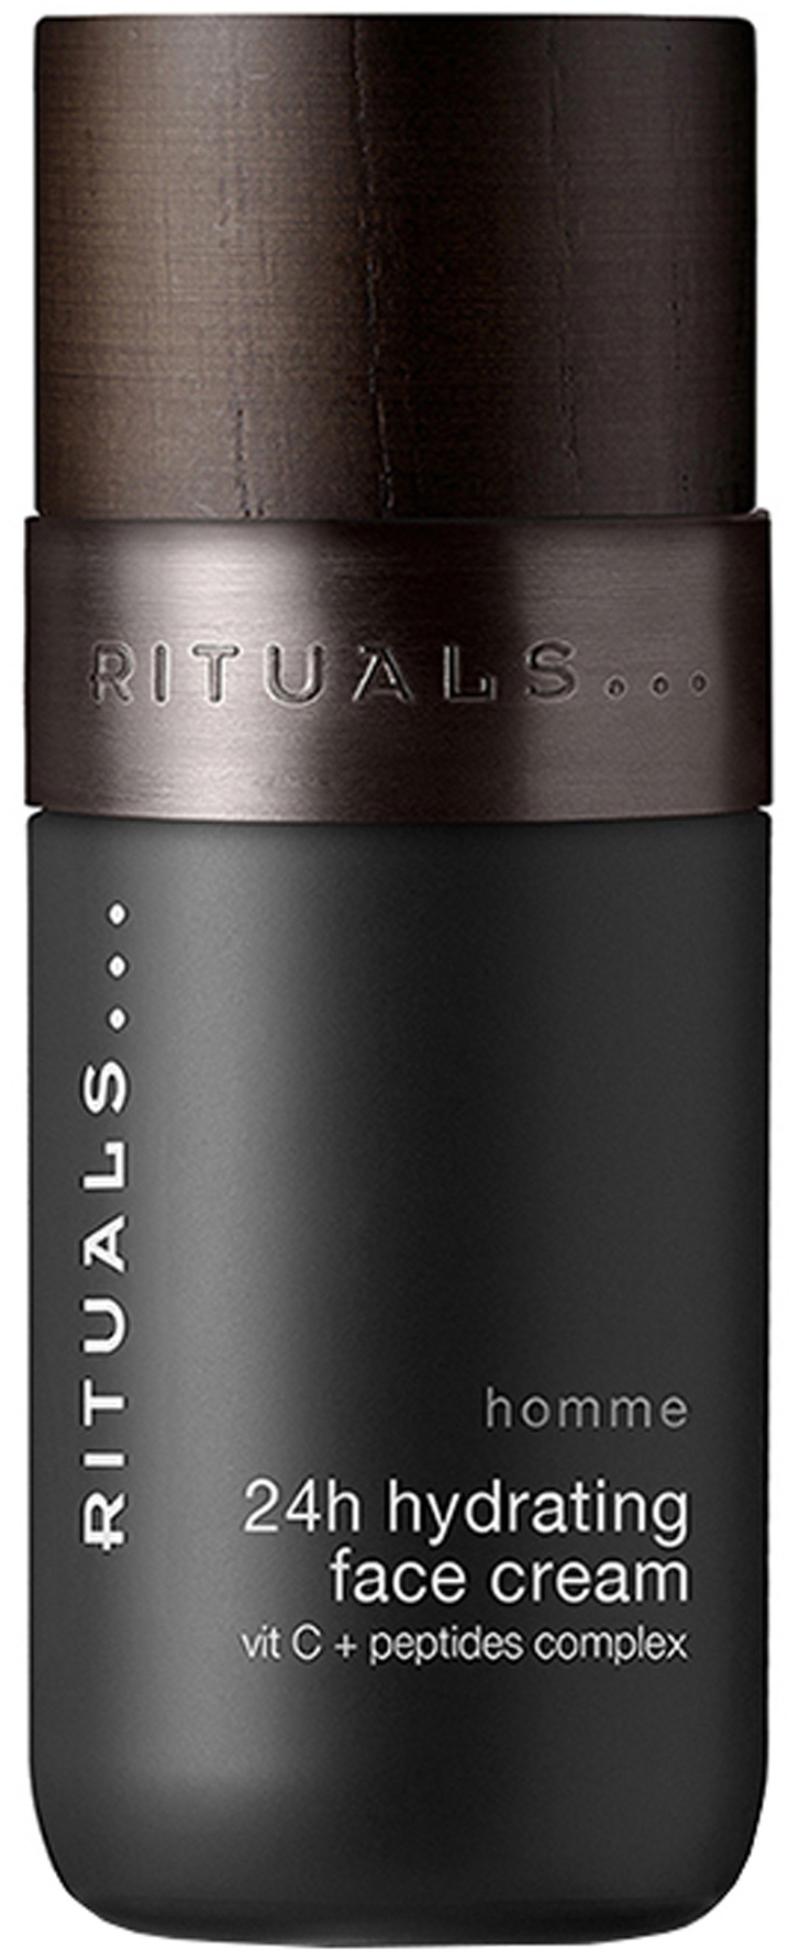 Rituals - Homme 24h Hydrating Face Cream 50 ml